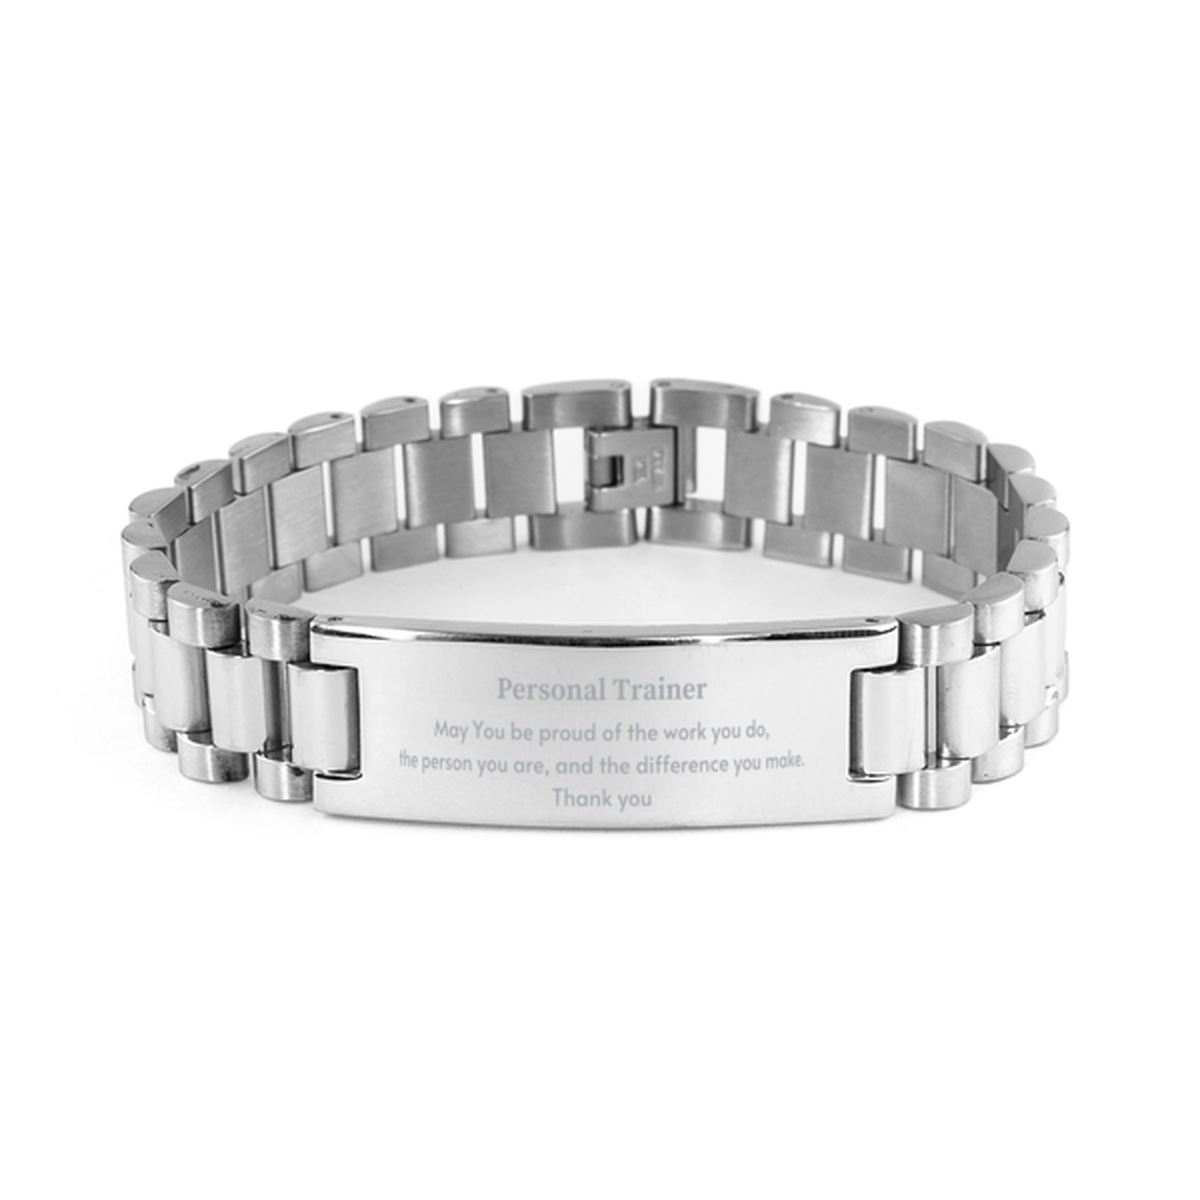 Heartwarming Ladder Stainless Steel Bracelet Retirement Coworkers Gifts for Personal Trainer, Personal Trainer May You be proud of the work you do, the person you are Gifts for Boss Men Women Friends